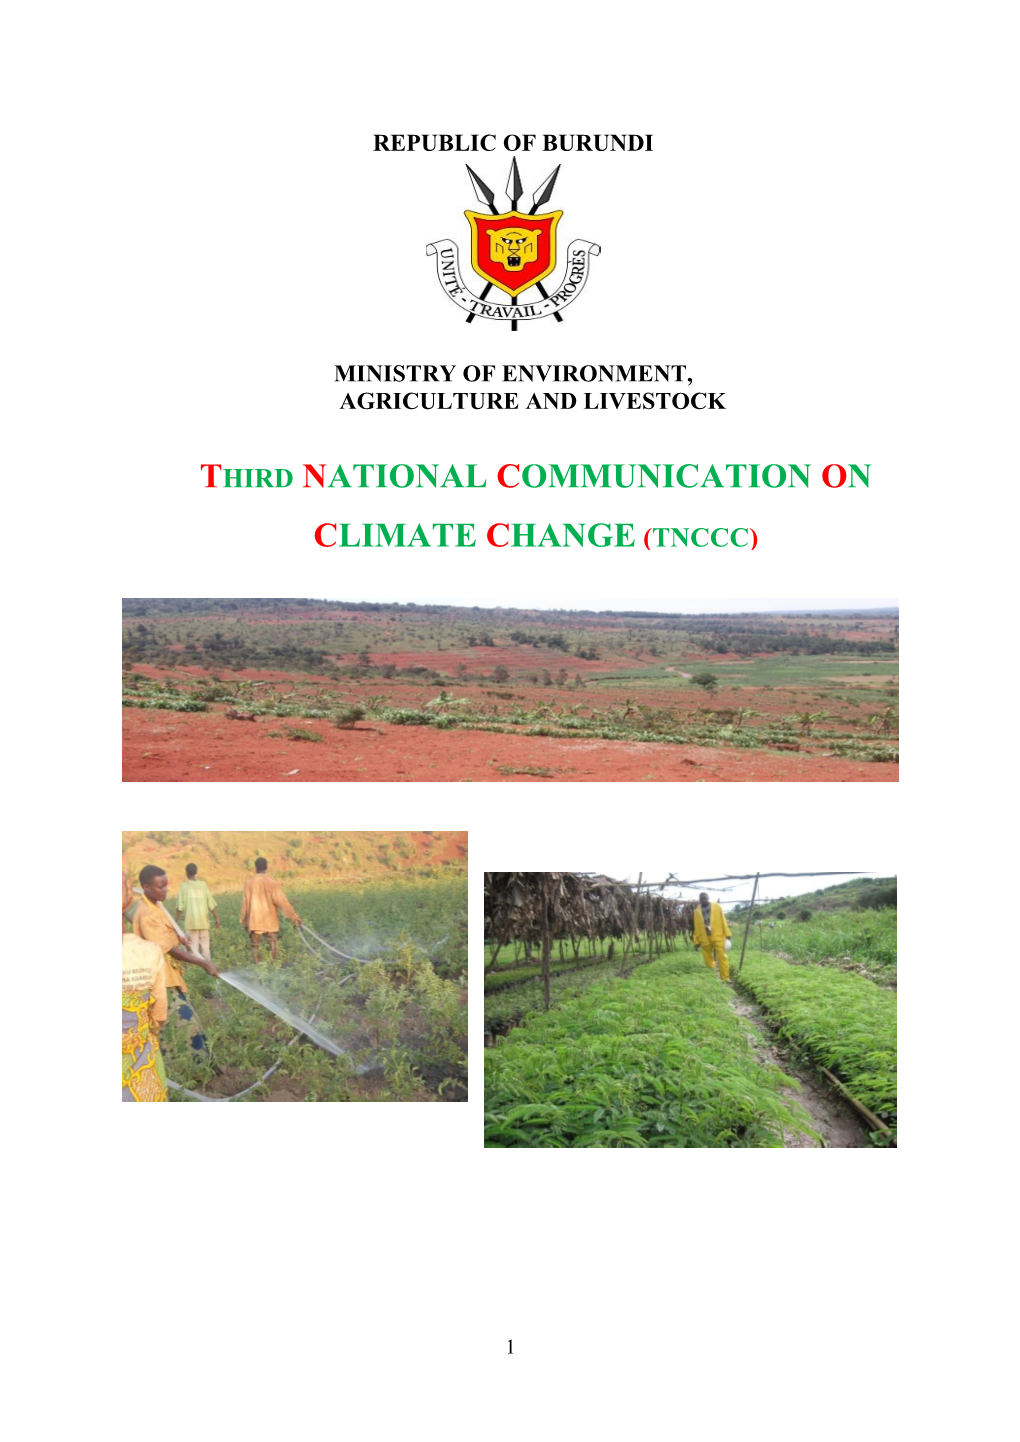 Third National Communication on Climate